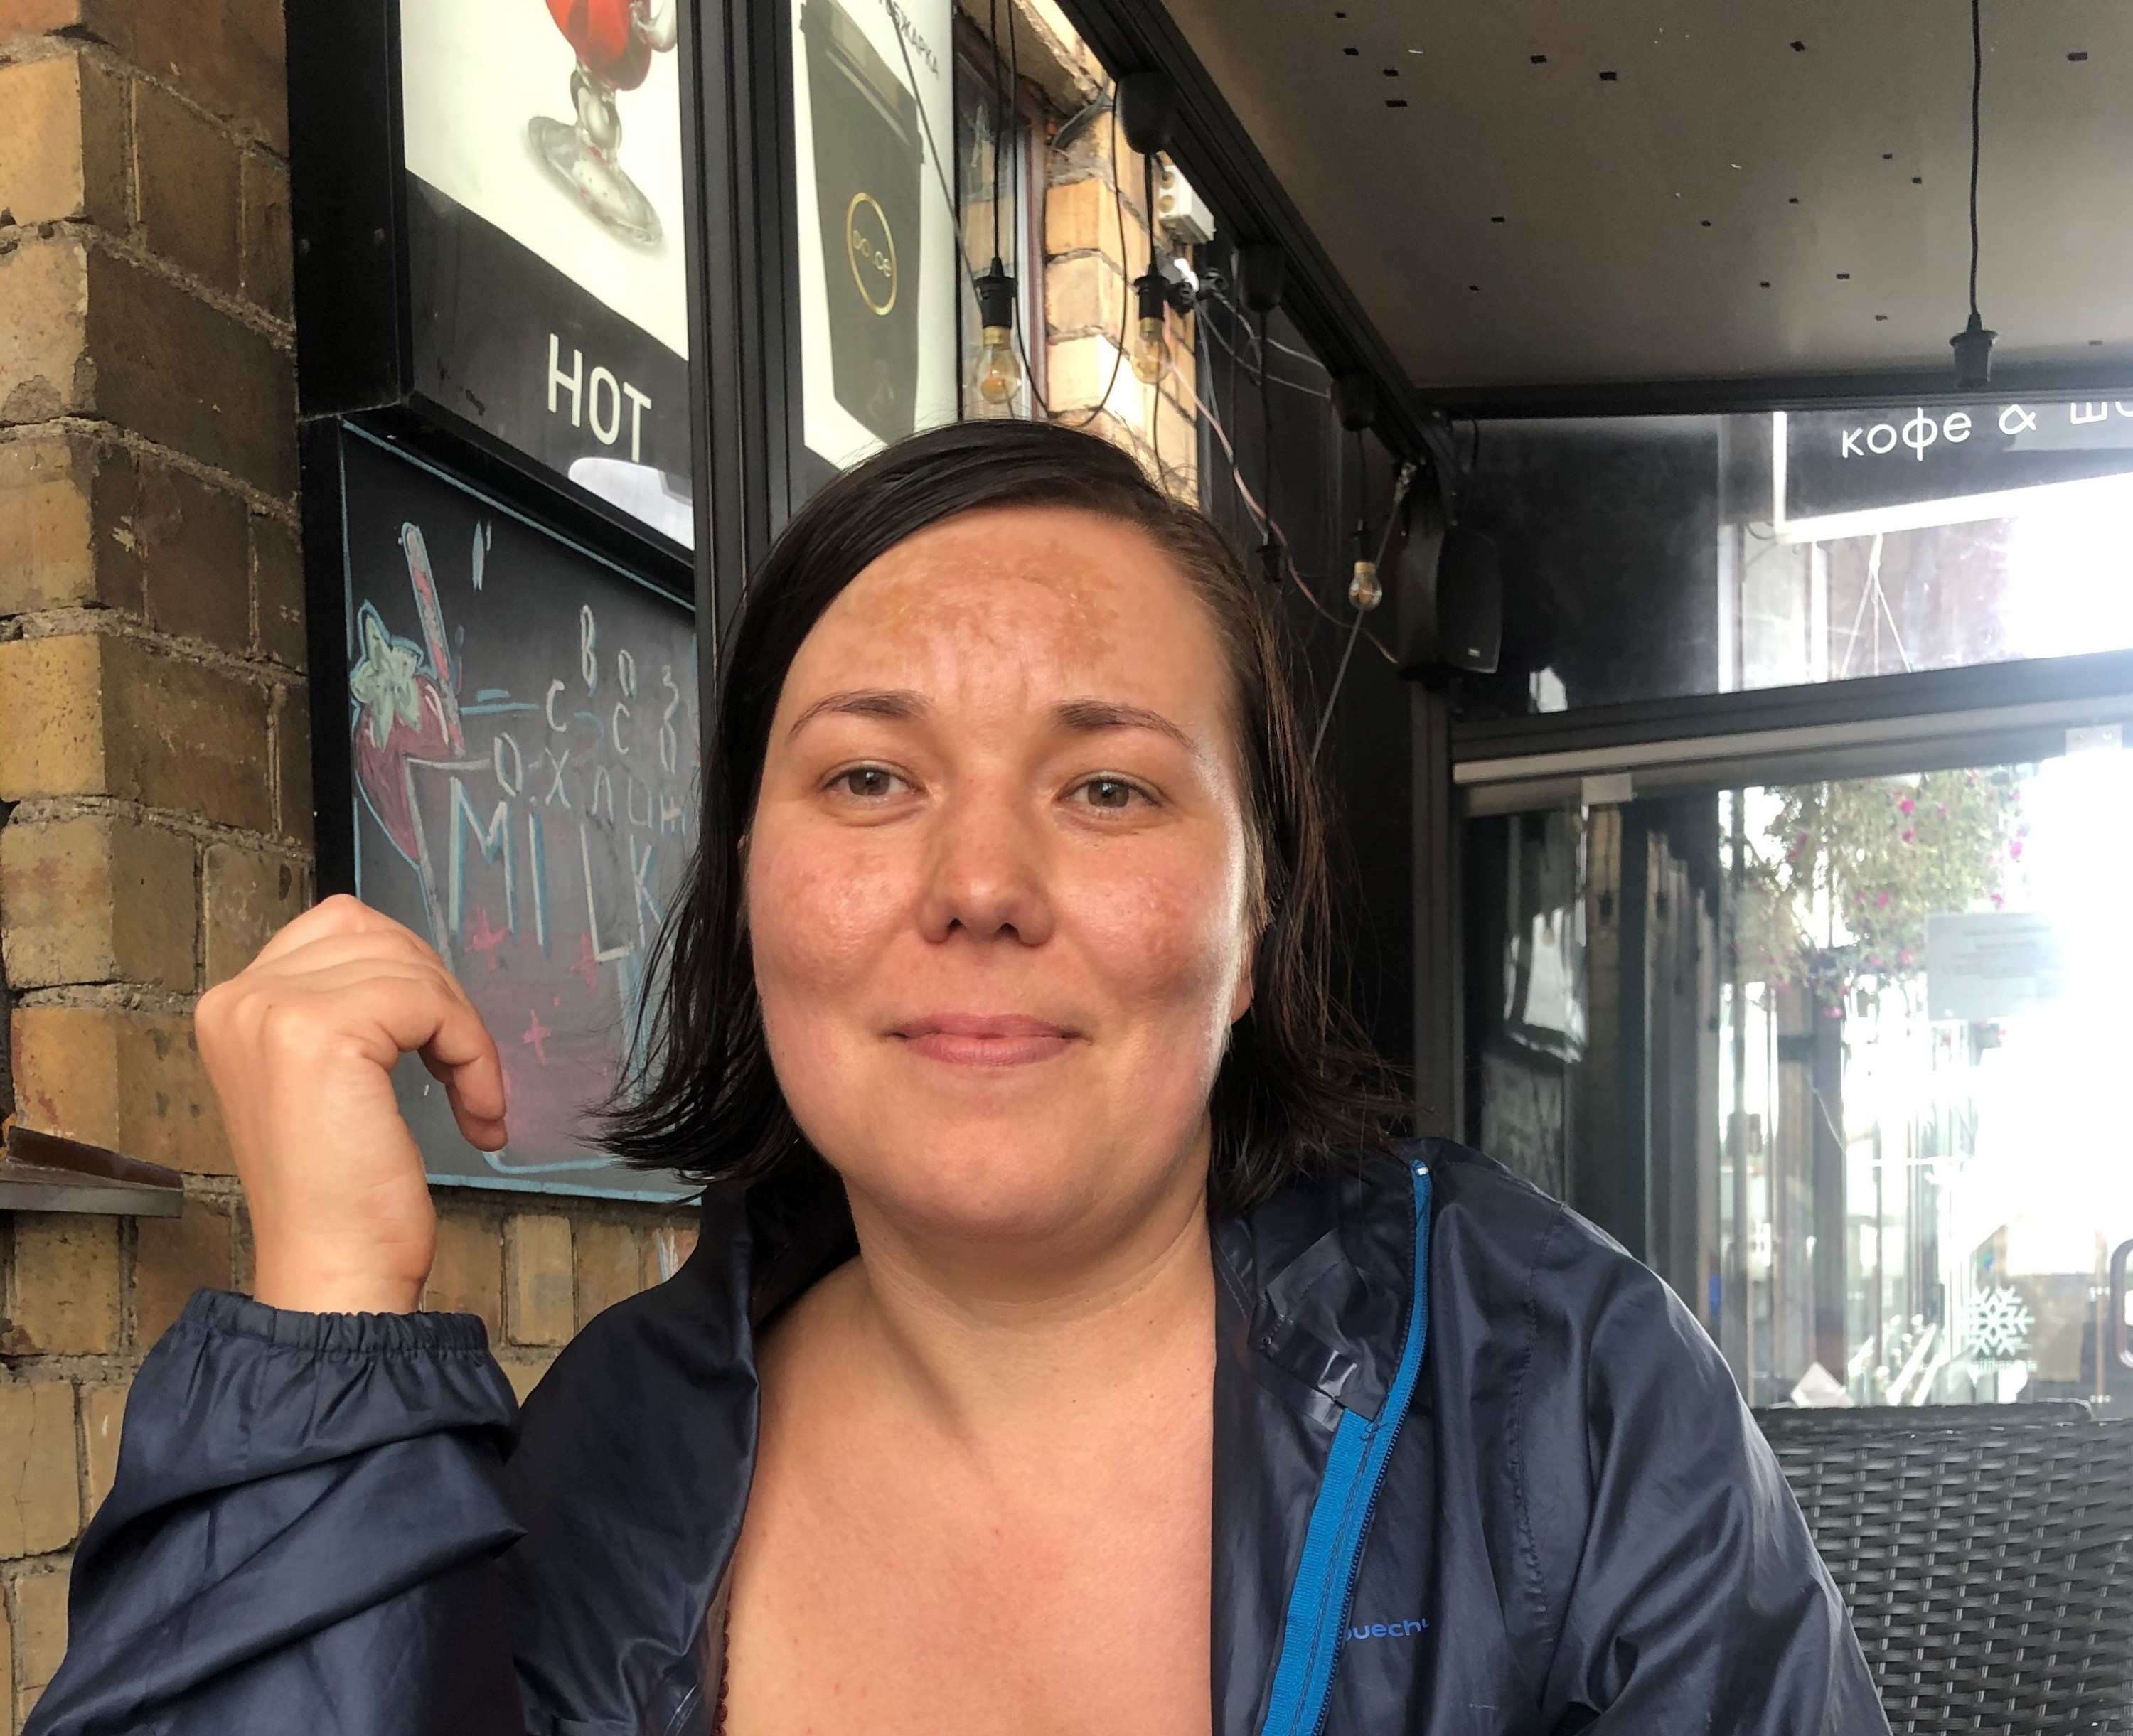 Katya (Ekaterina) Novikova several hours after her release from detention. Minsk, August 12, 2020. © Human Rights Watch